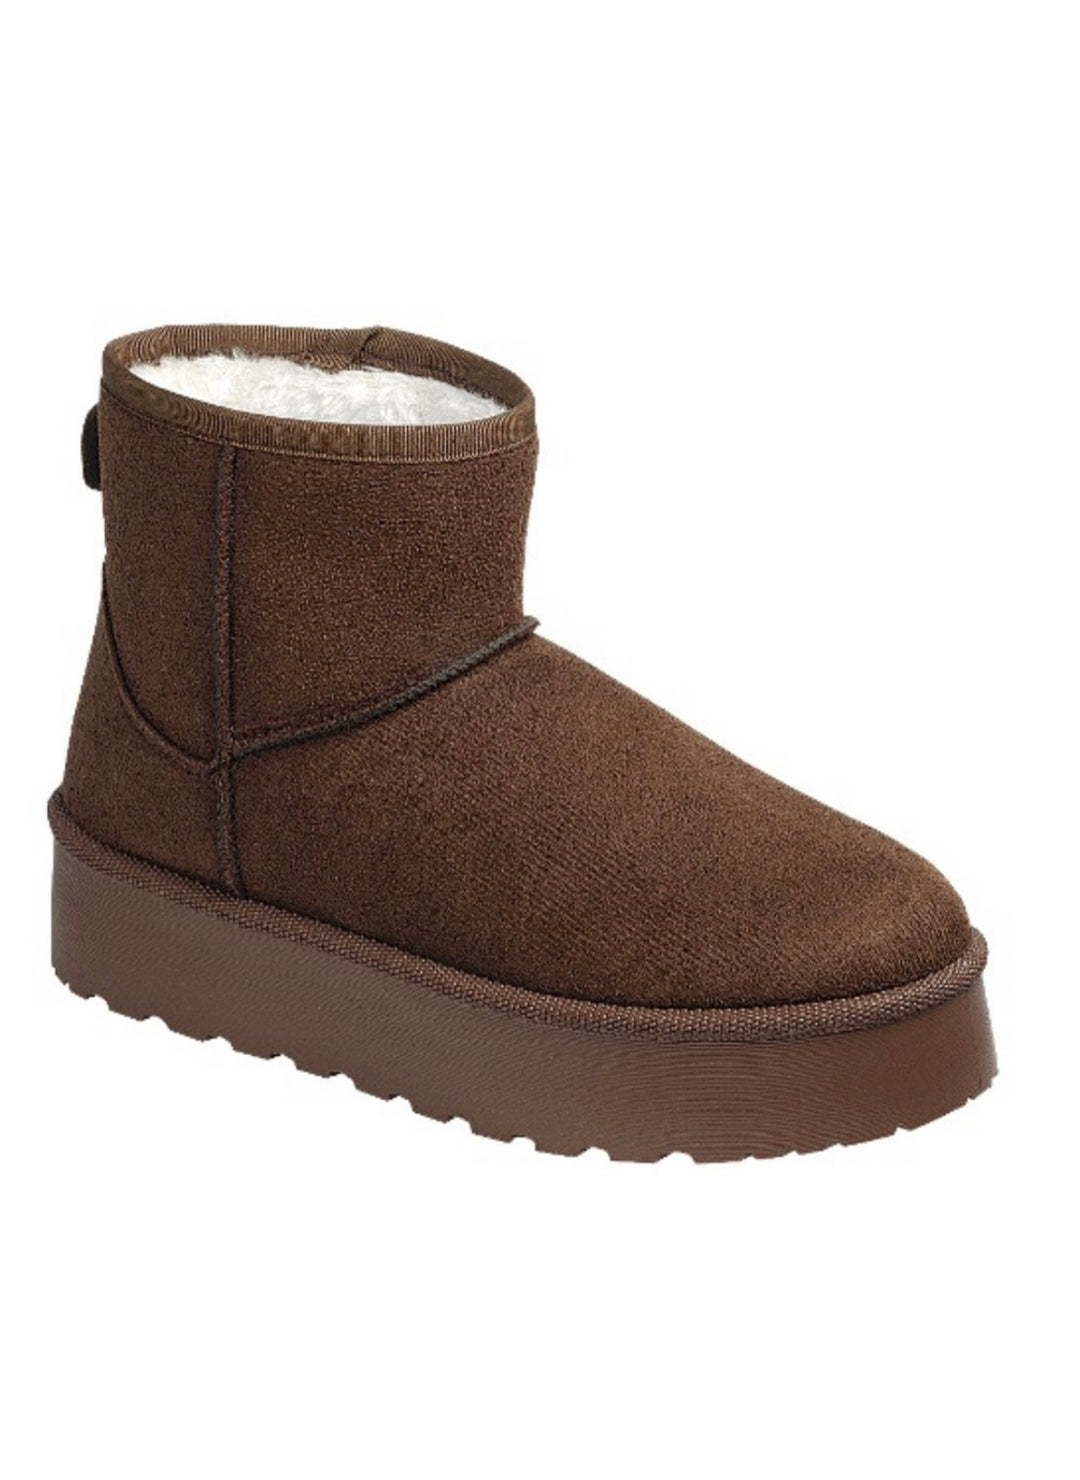 Ugg style Cozy Slipper Boots